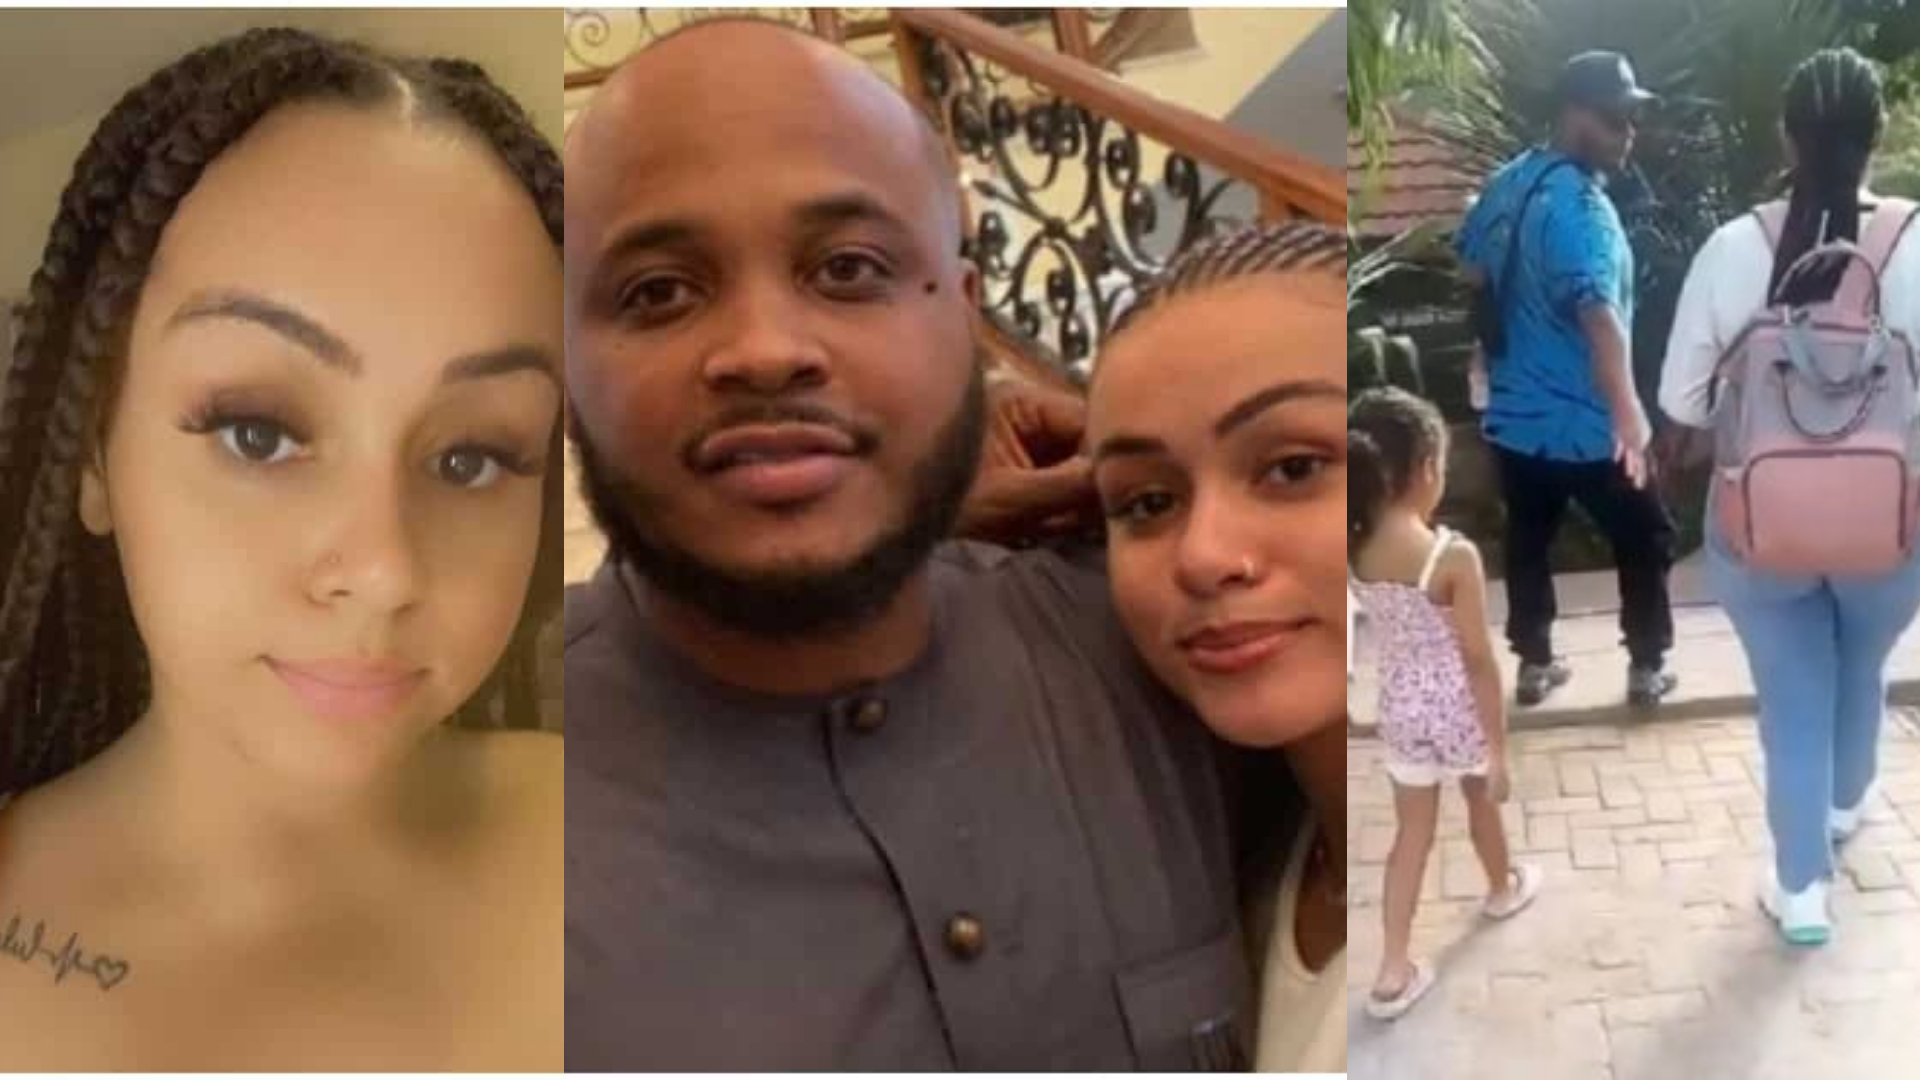 “Na mumu dey put mouth for relationship matter” – Netizens react as Sina Rambo and wife reconcile after separation